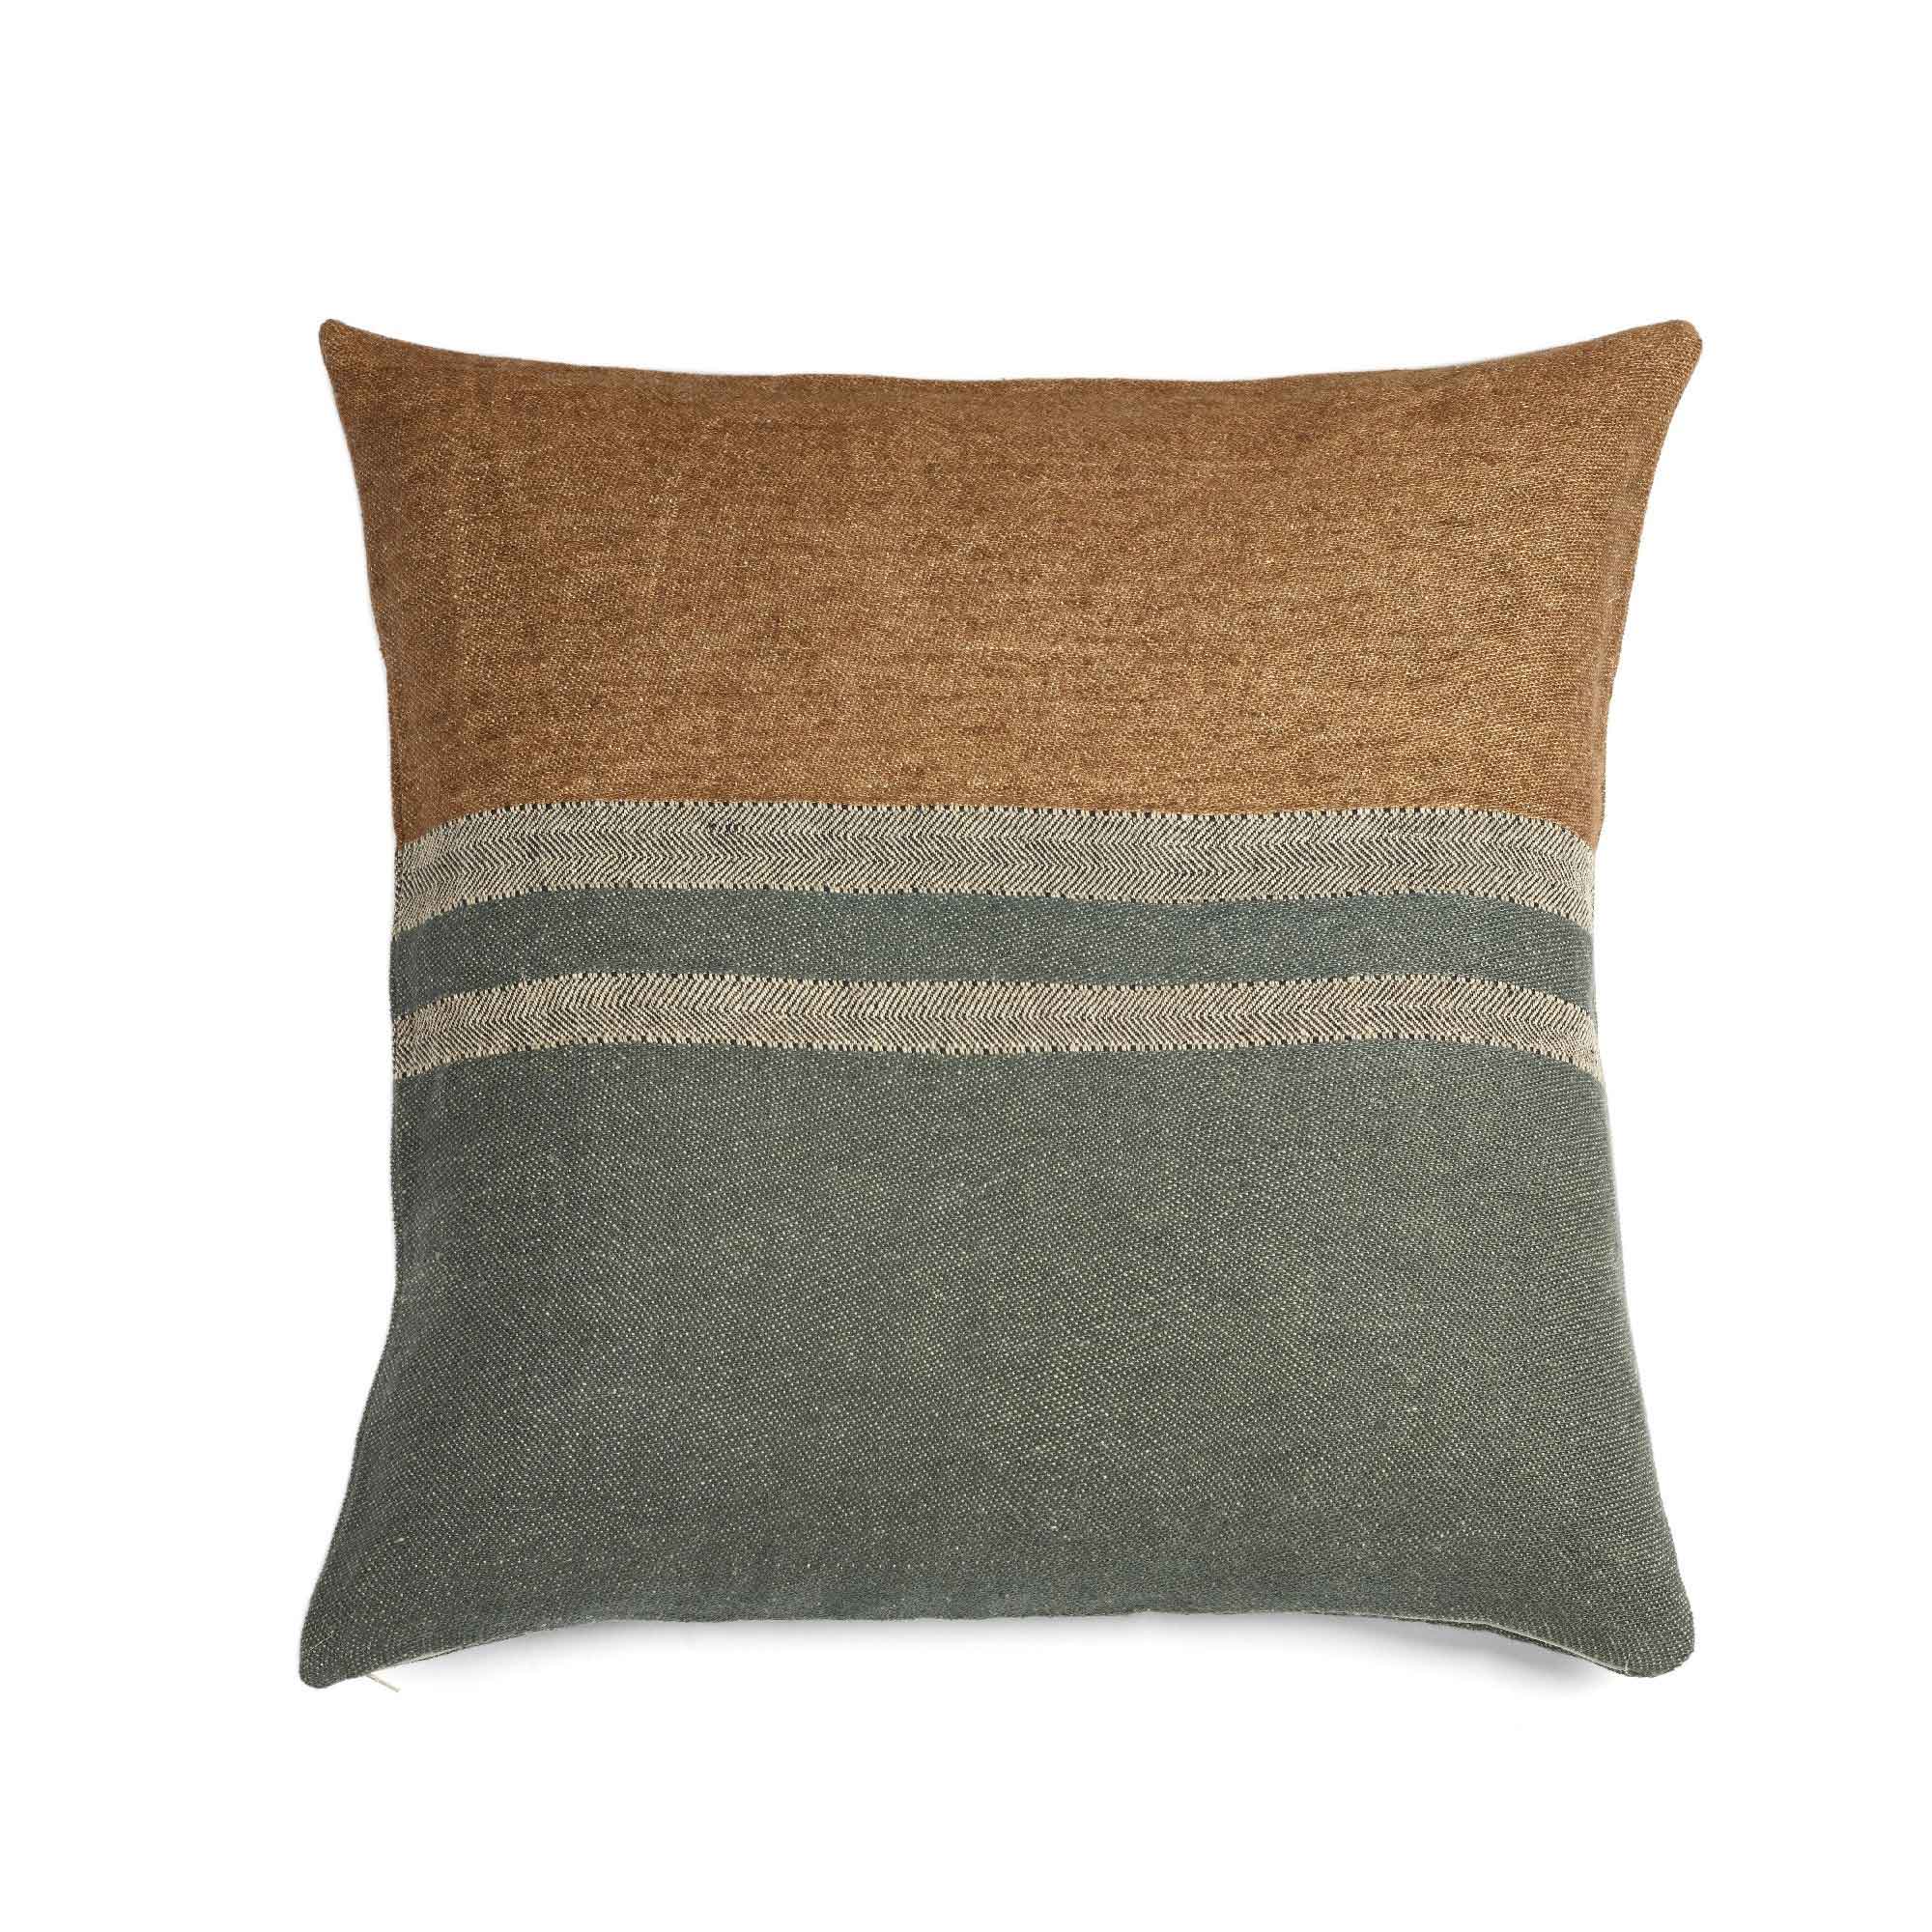 Belgian linen throw pillow cover flat lay product shot in color Alouette by Libeco for South Hous.